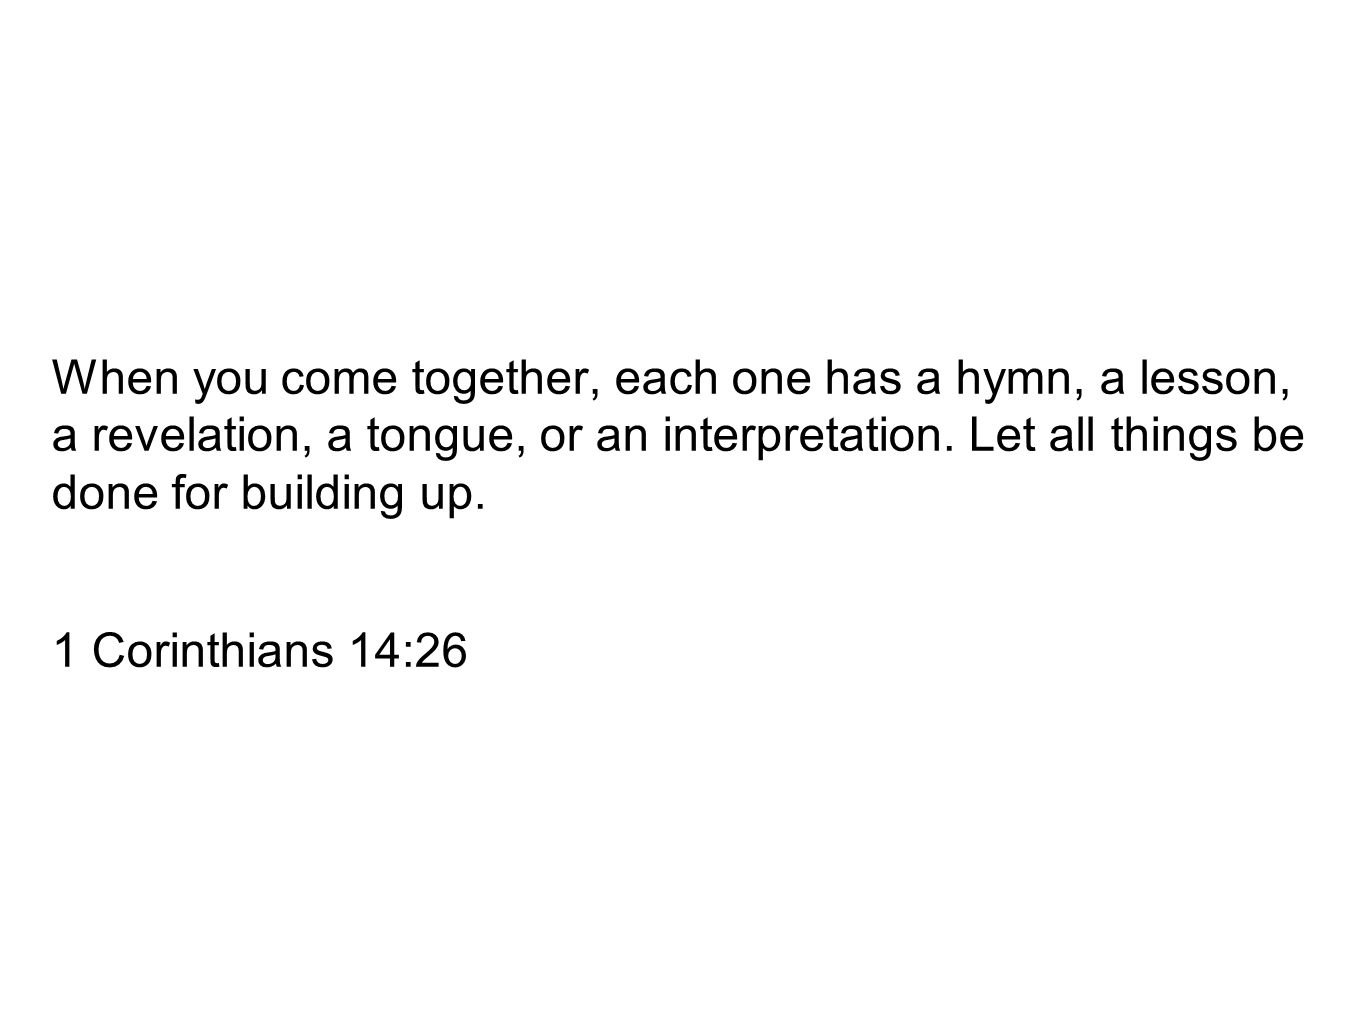 When you come together, each one has a hymn, a lesson, a revelation, a tongue, or an interpretation. Let all things be done for building up.